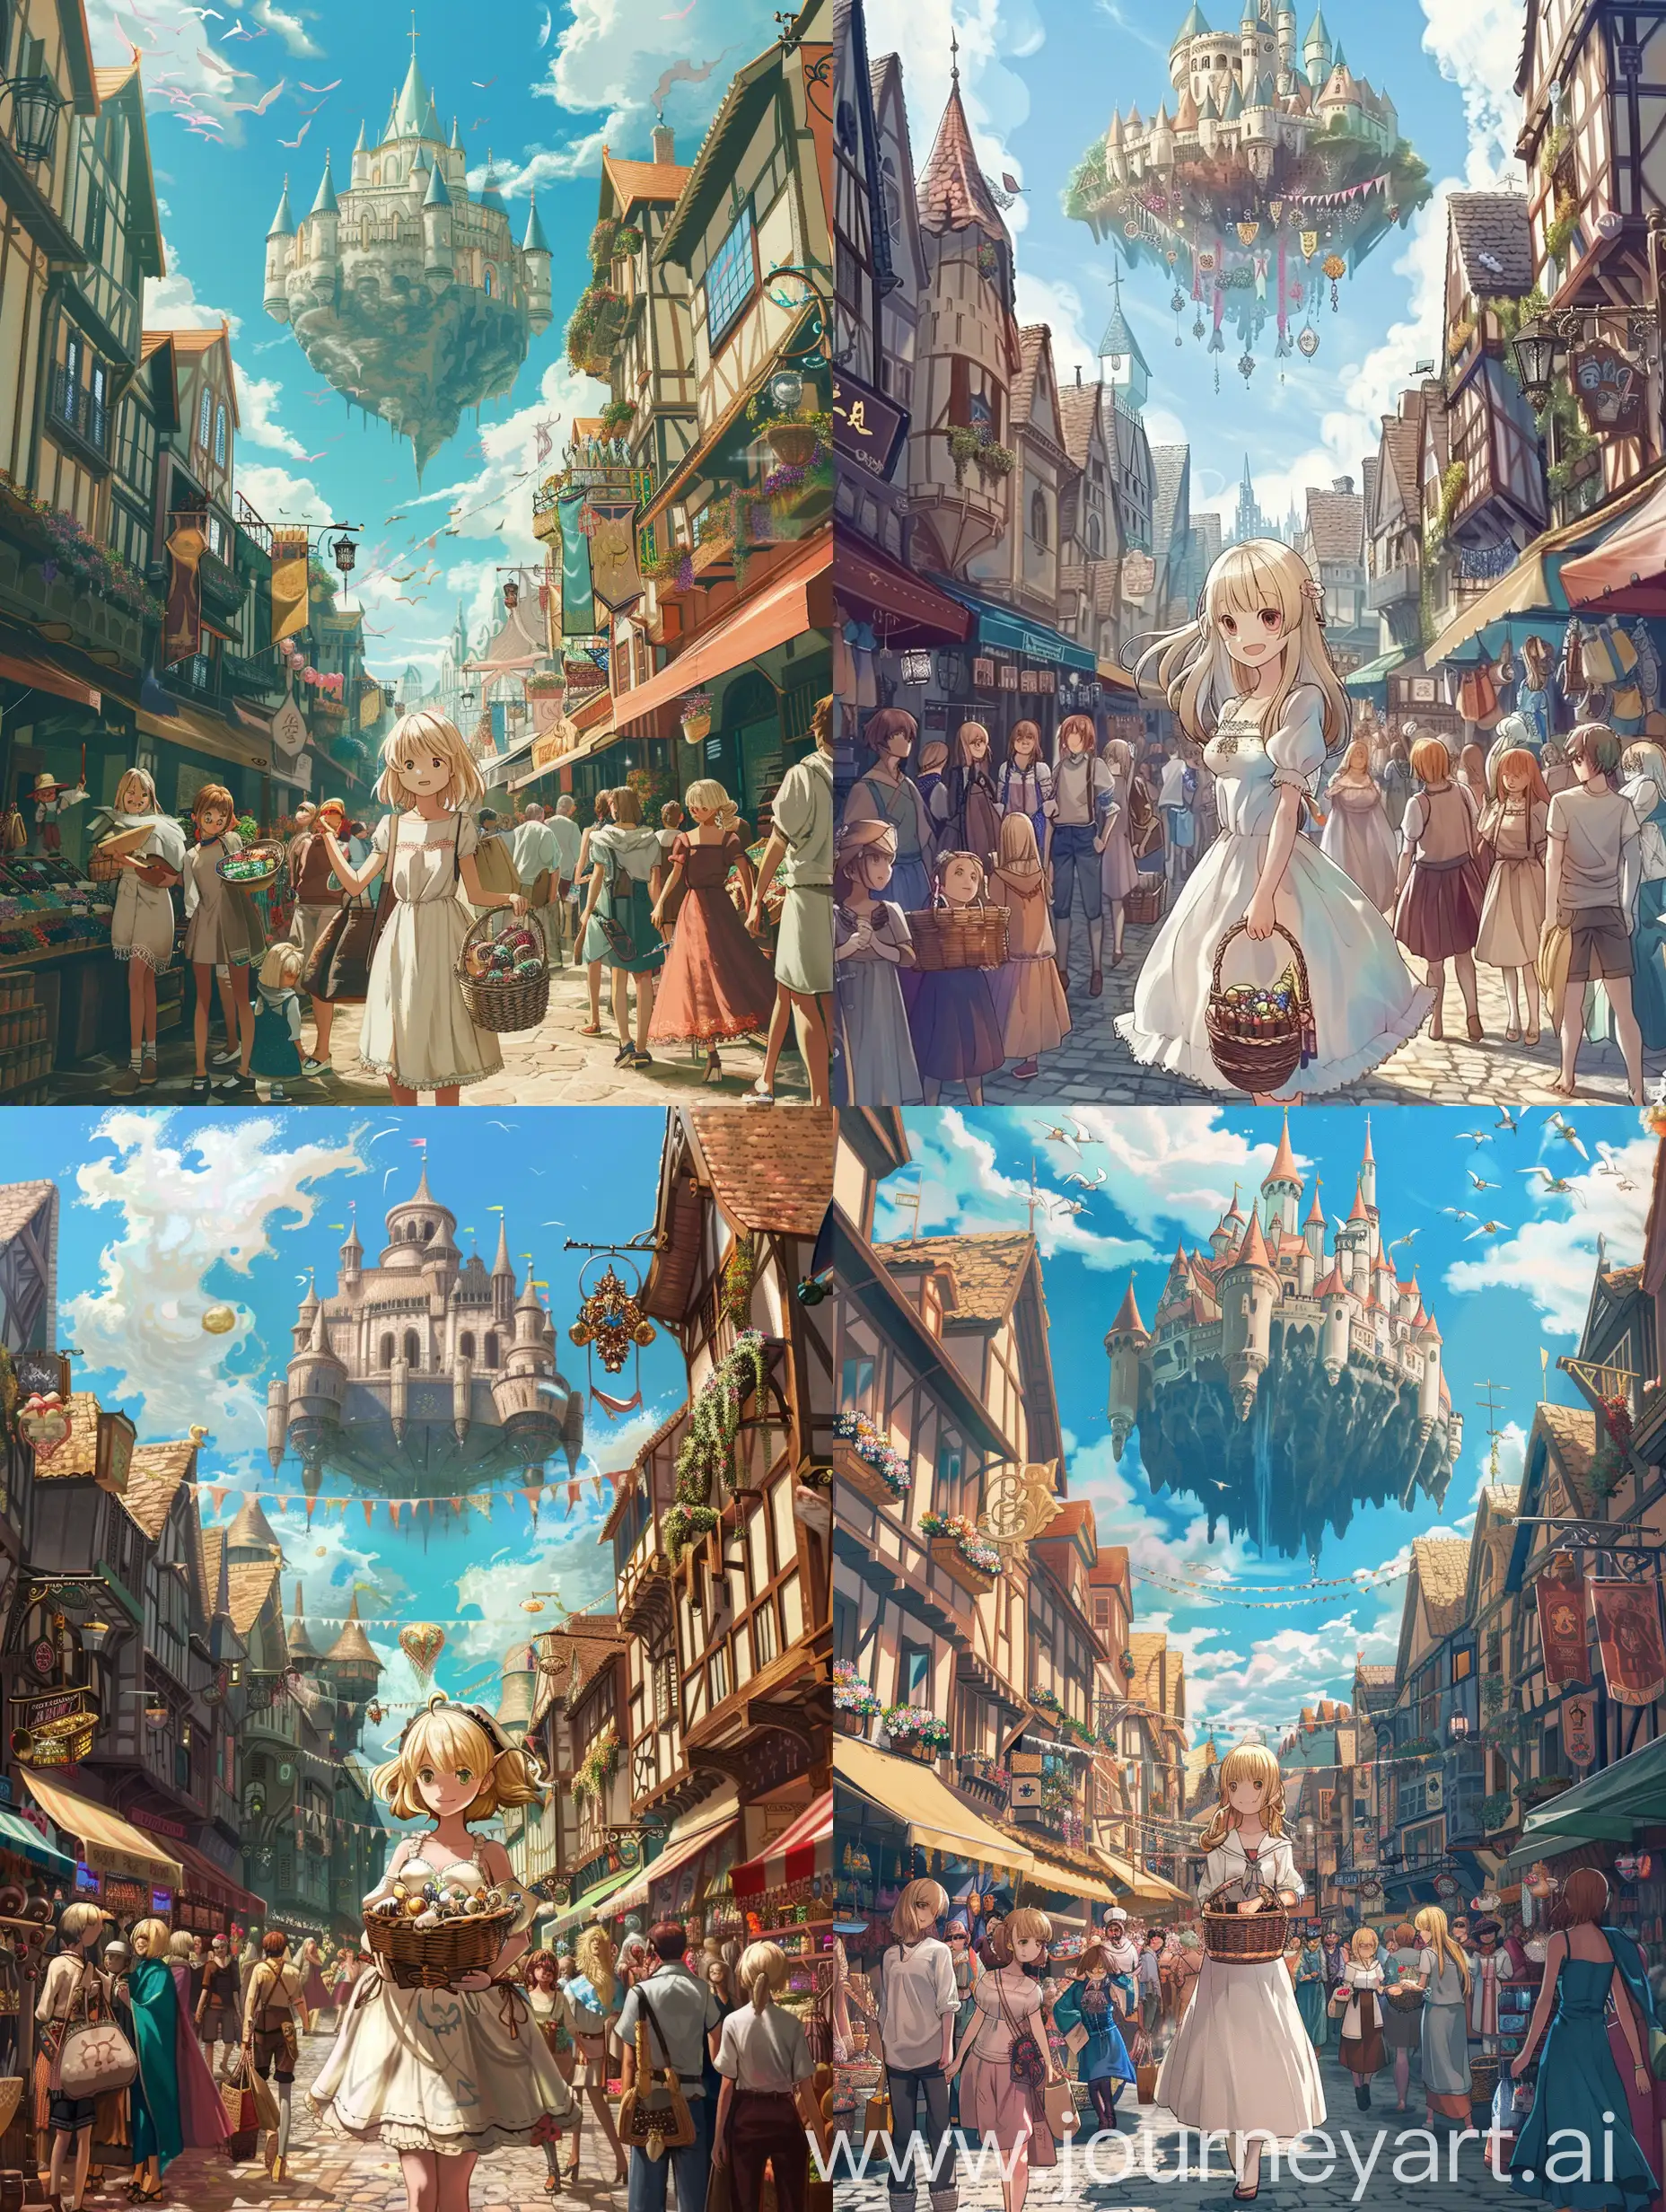 Medieval-Fantasy-Anime-Town-Festival-with-Magical-Castle-and-Blonde-Girl-Shopping